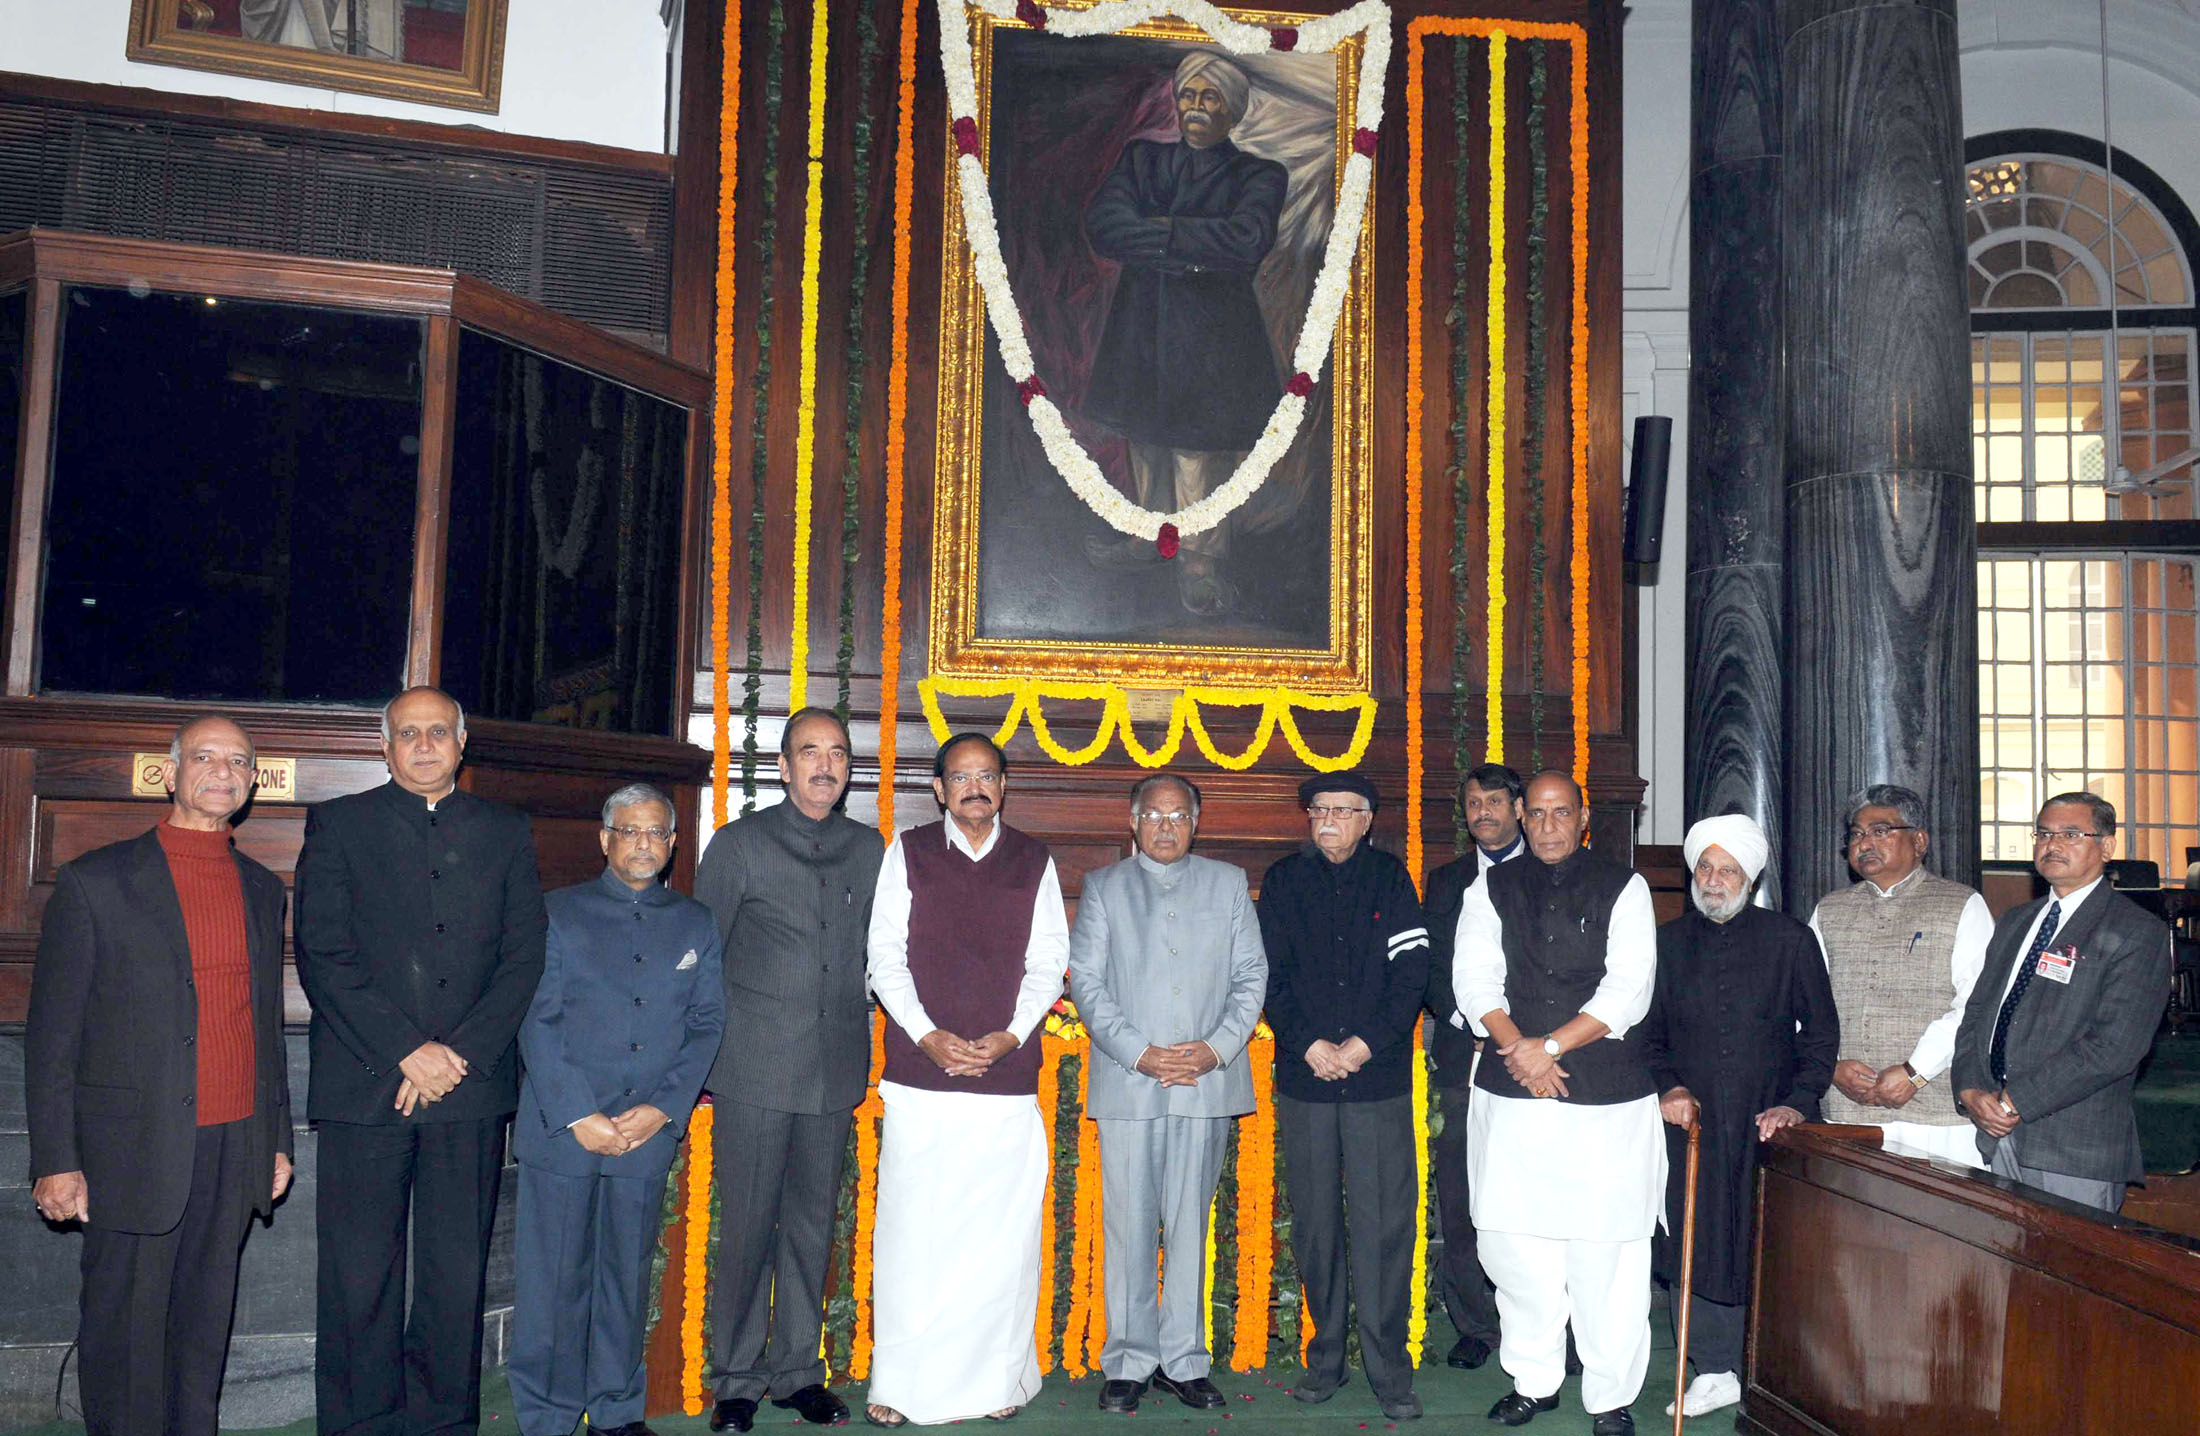 The Union Minister for Urban Development, Housing and Urban Poverty Alleviation and Parliamentary Affairs, Shri M. Venkaiah Naidu, the Union Home Minister, Shri Rajnath Singh and other dignitaries paid tributes to Lala Lajpat Rai on his birth anniversary, at Parliament House, in New Delhi on January 28, 2016.